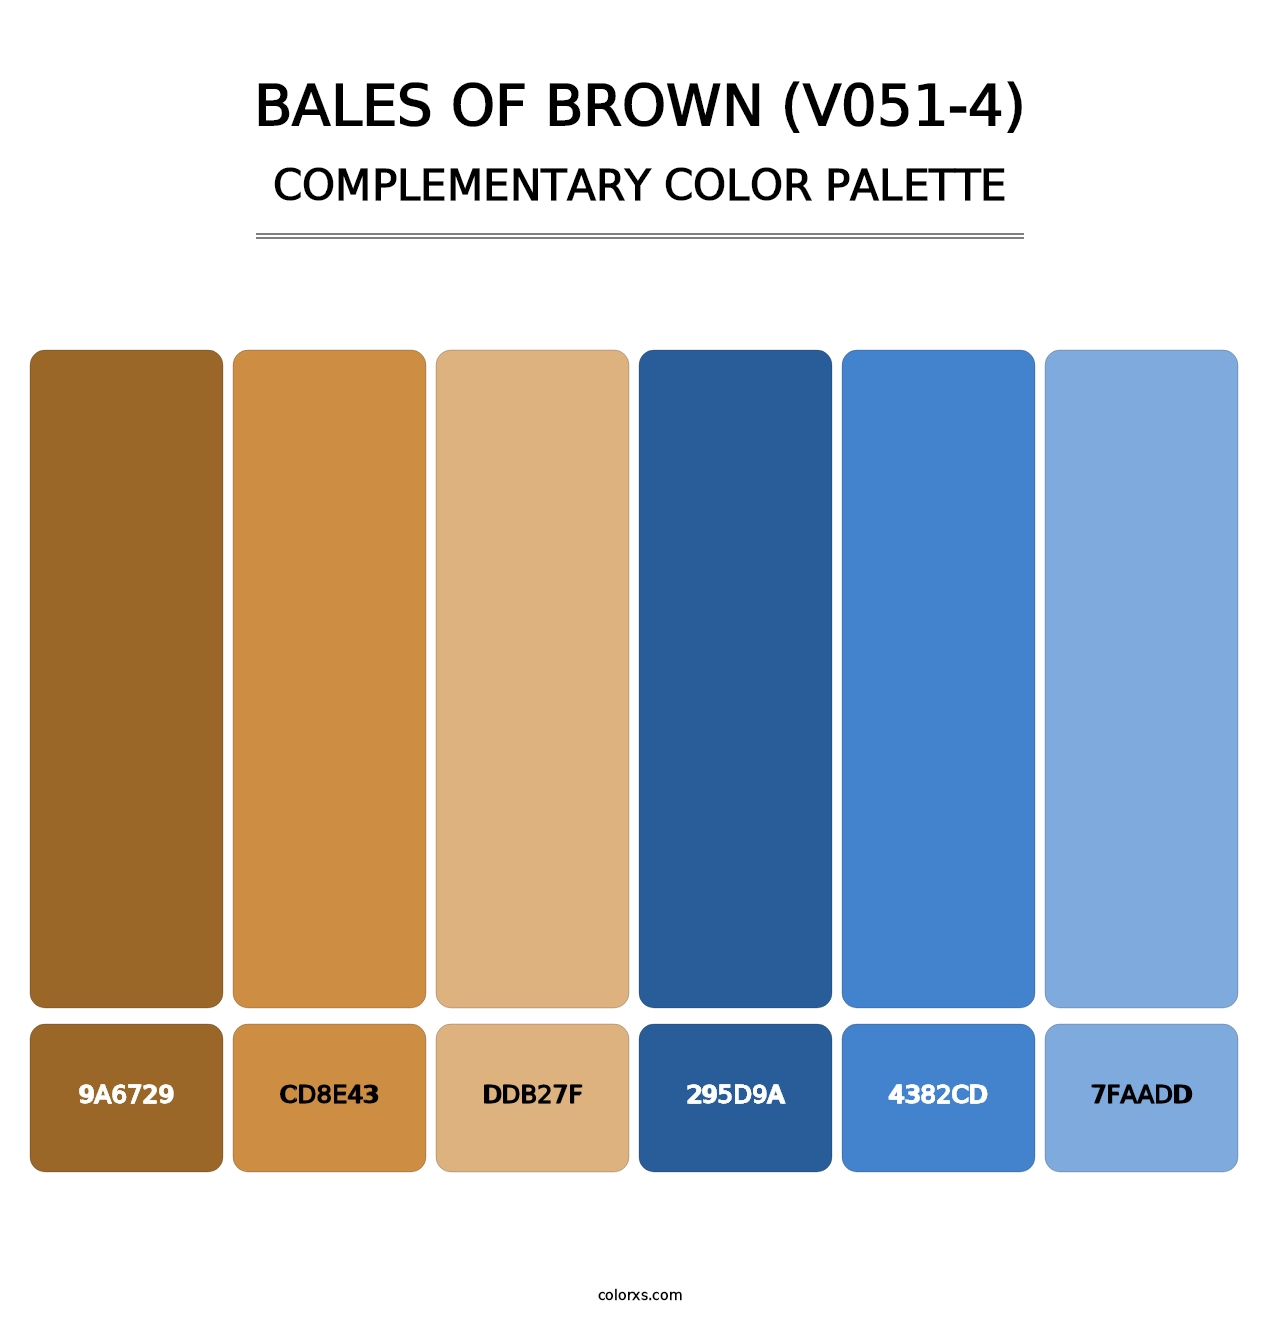 Bales of Brown (V051-4) - Complementary Color Palette